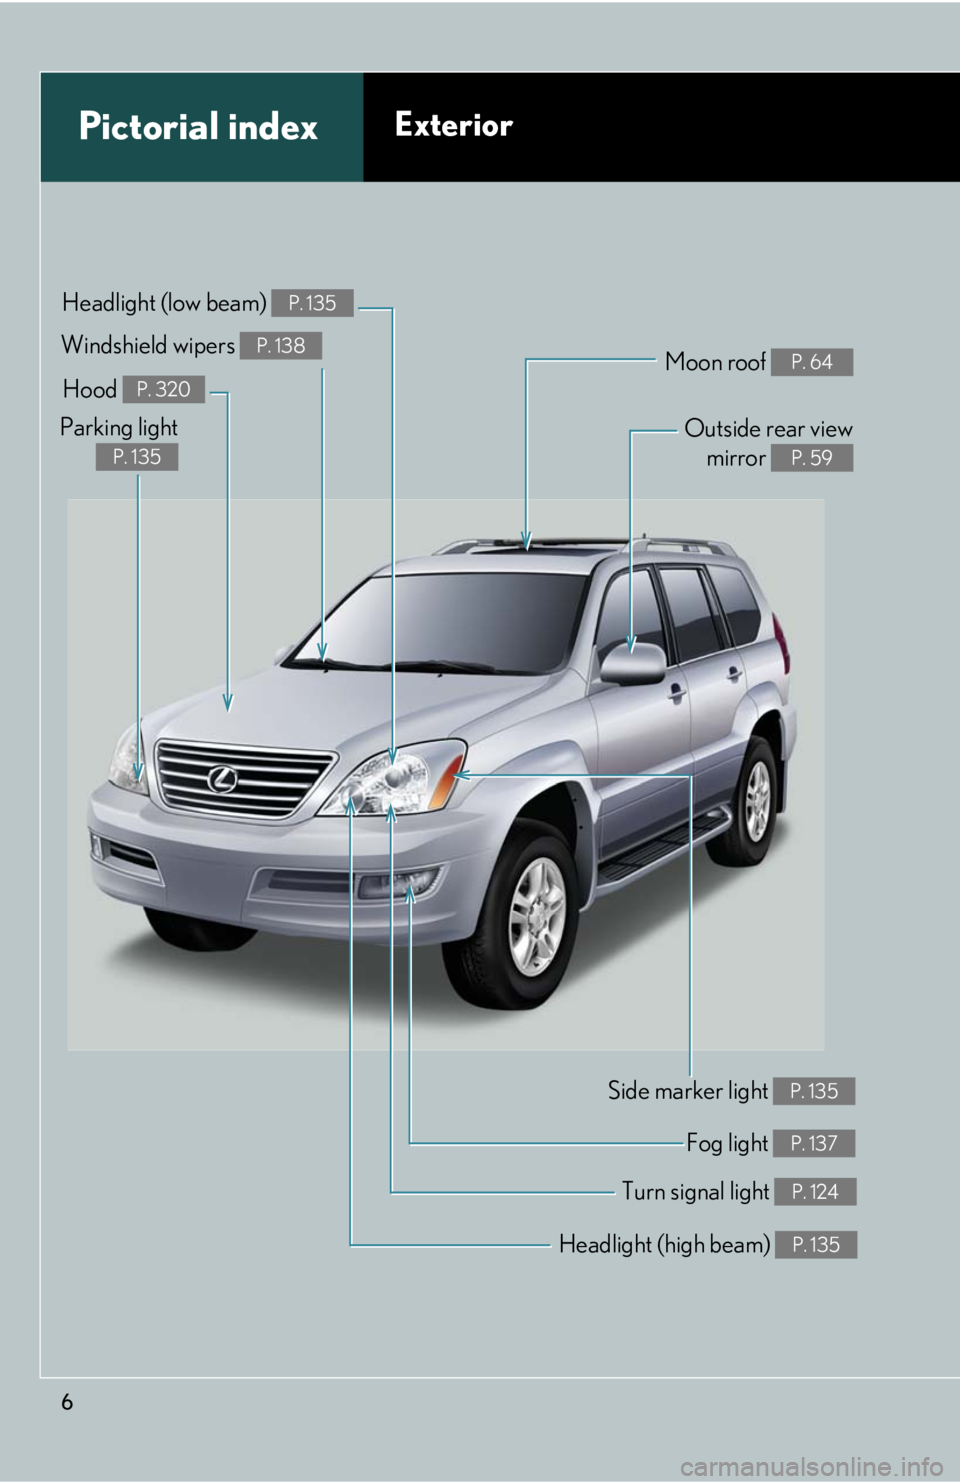 Lexus GX470 2008  Specifications / LEXUS 2008 GX470 OWNERS MANUAL (OM60D82U) 6
Headlight (high beam) P. 135
Pictorial indexExterior
Turn signal light P. 124
Fog light P. 137
Side marker light P. 135
Headlight (low beam) P. 135
Hood P. 320
Parking light
P. 135
Windshield wipers